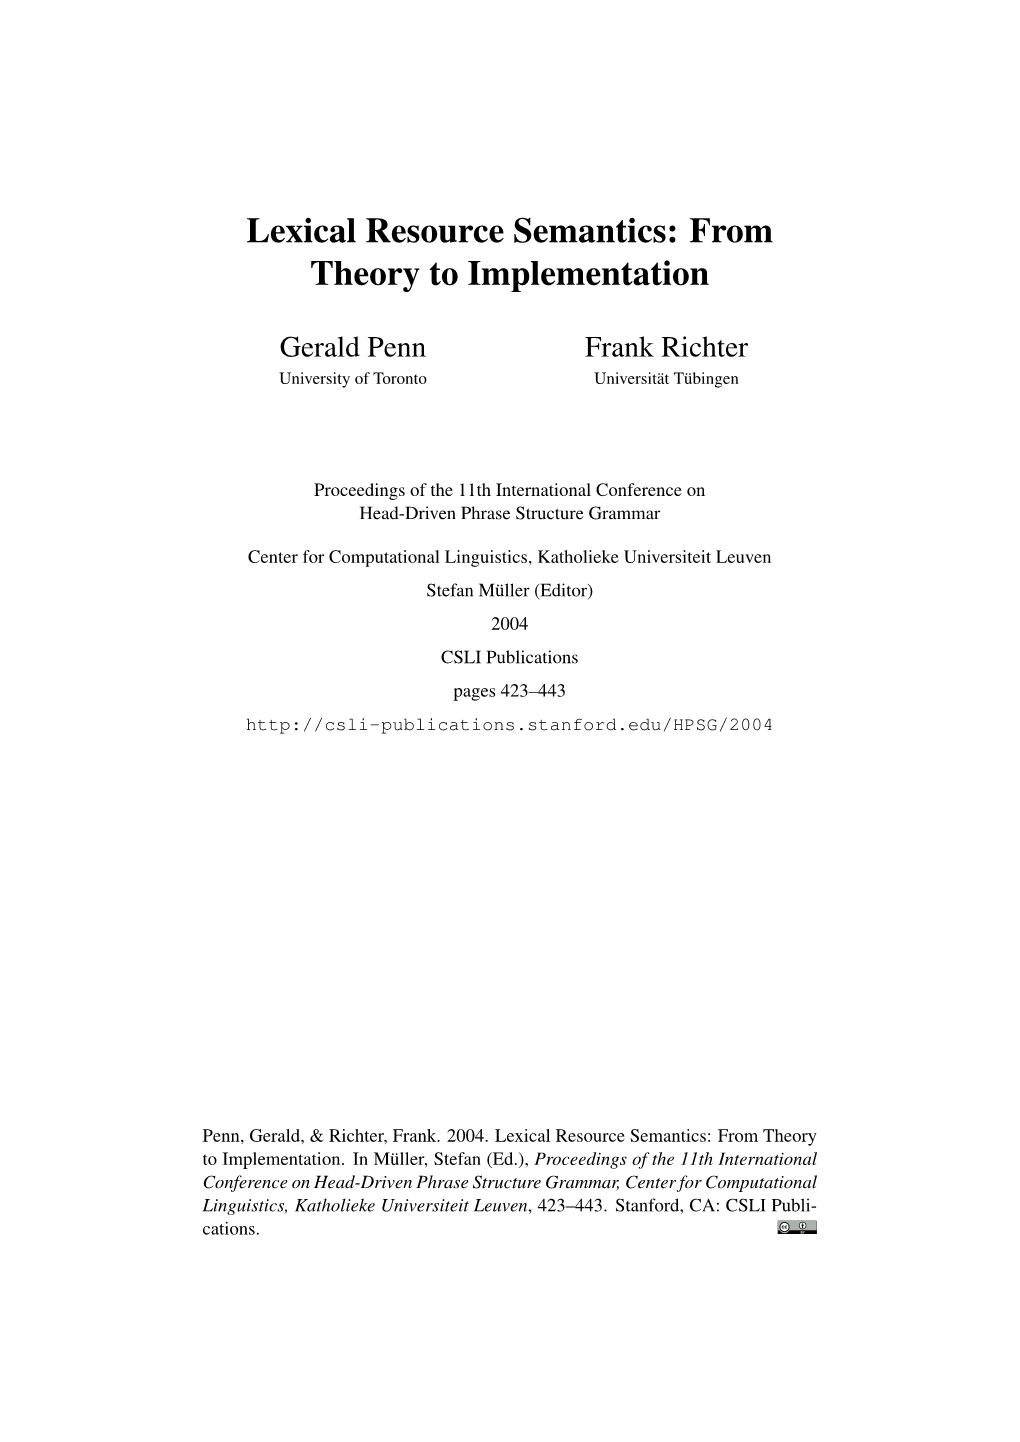 Lexical Resource Semantics: from Theory to Implementation